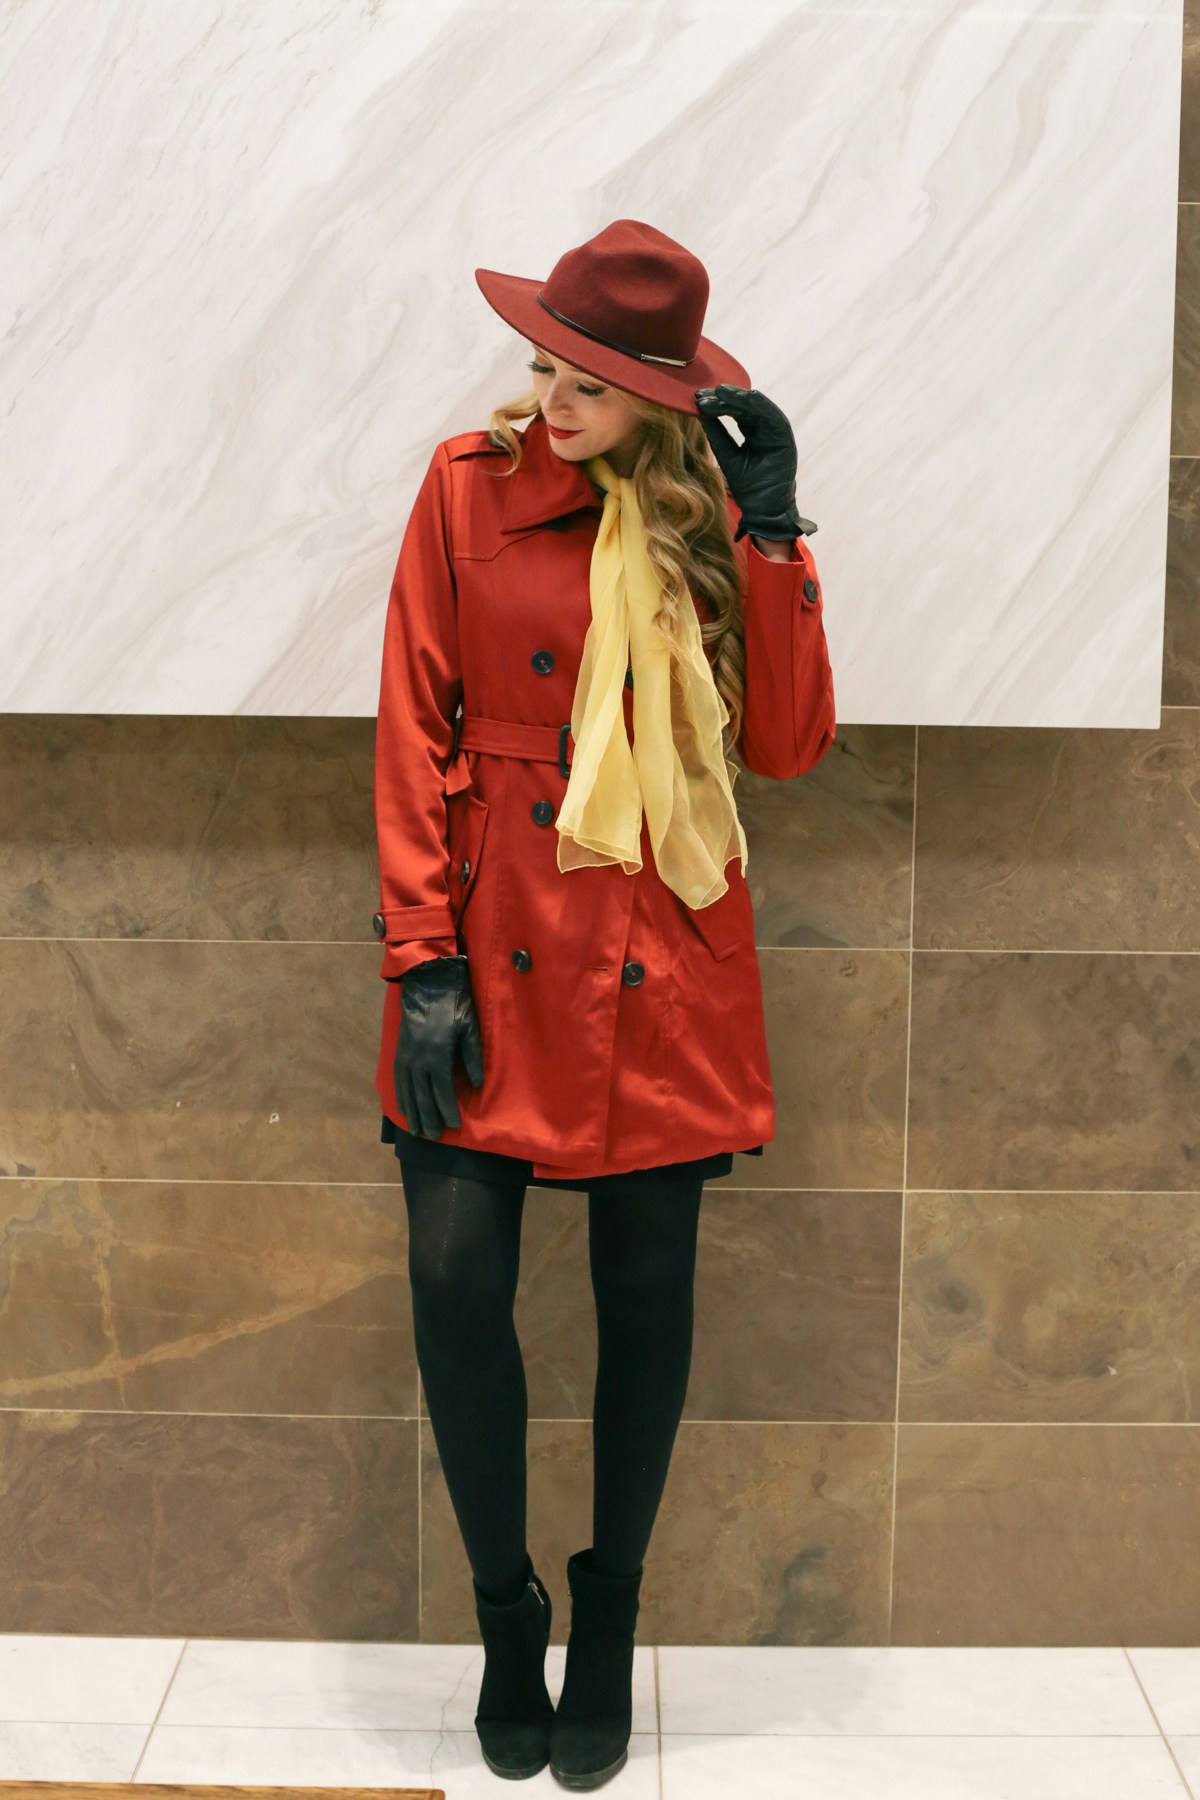 Carmen Sandiego DIY Halloween Costume: wearing a red trench coat, red fedora and yellow scarf.